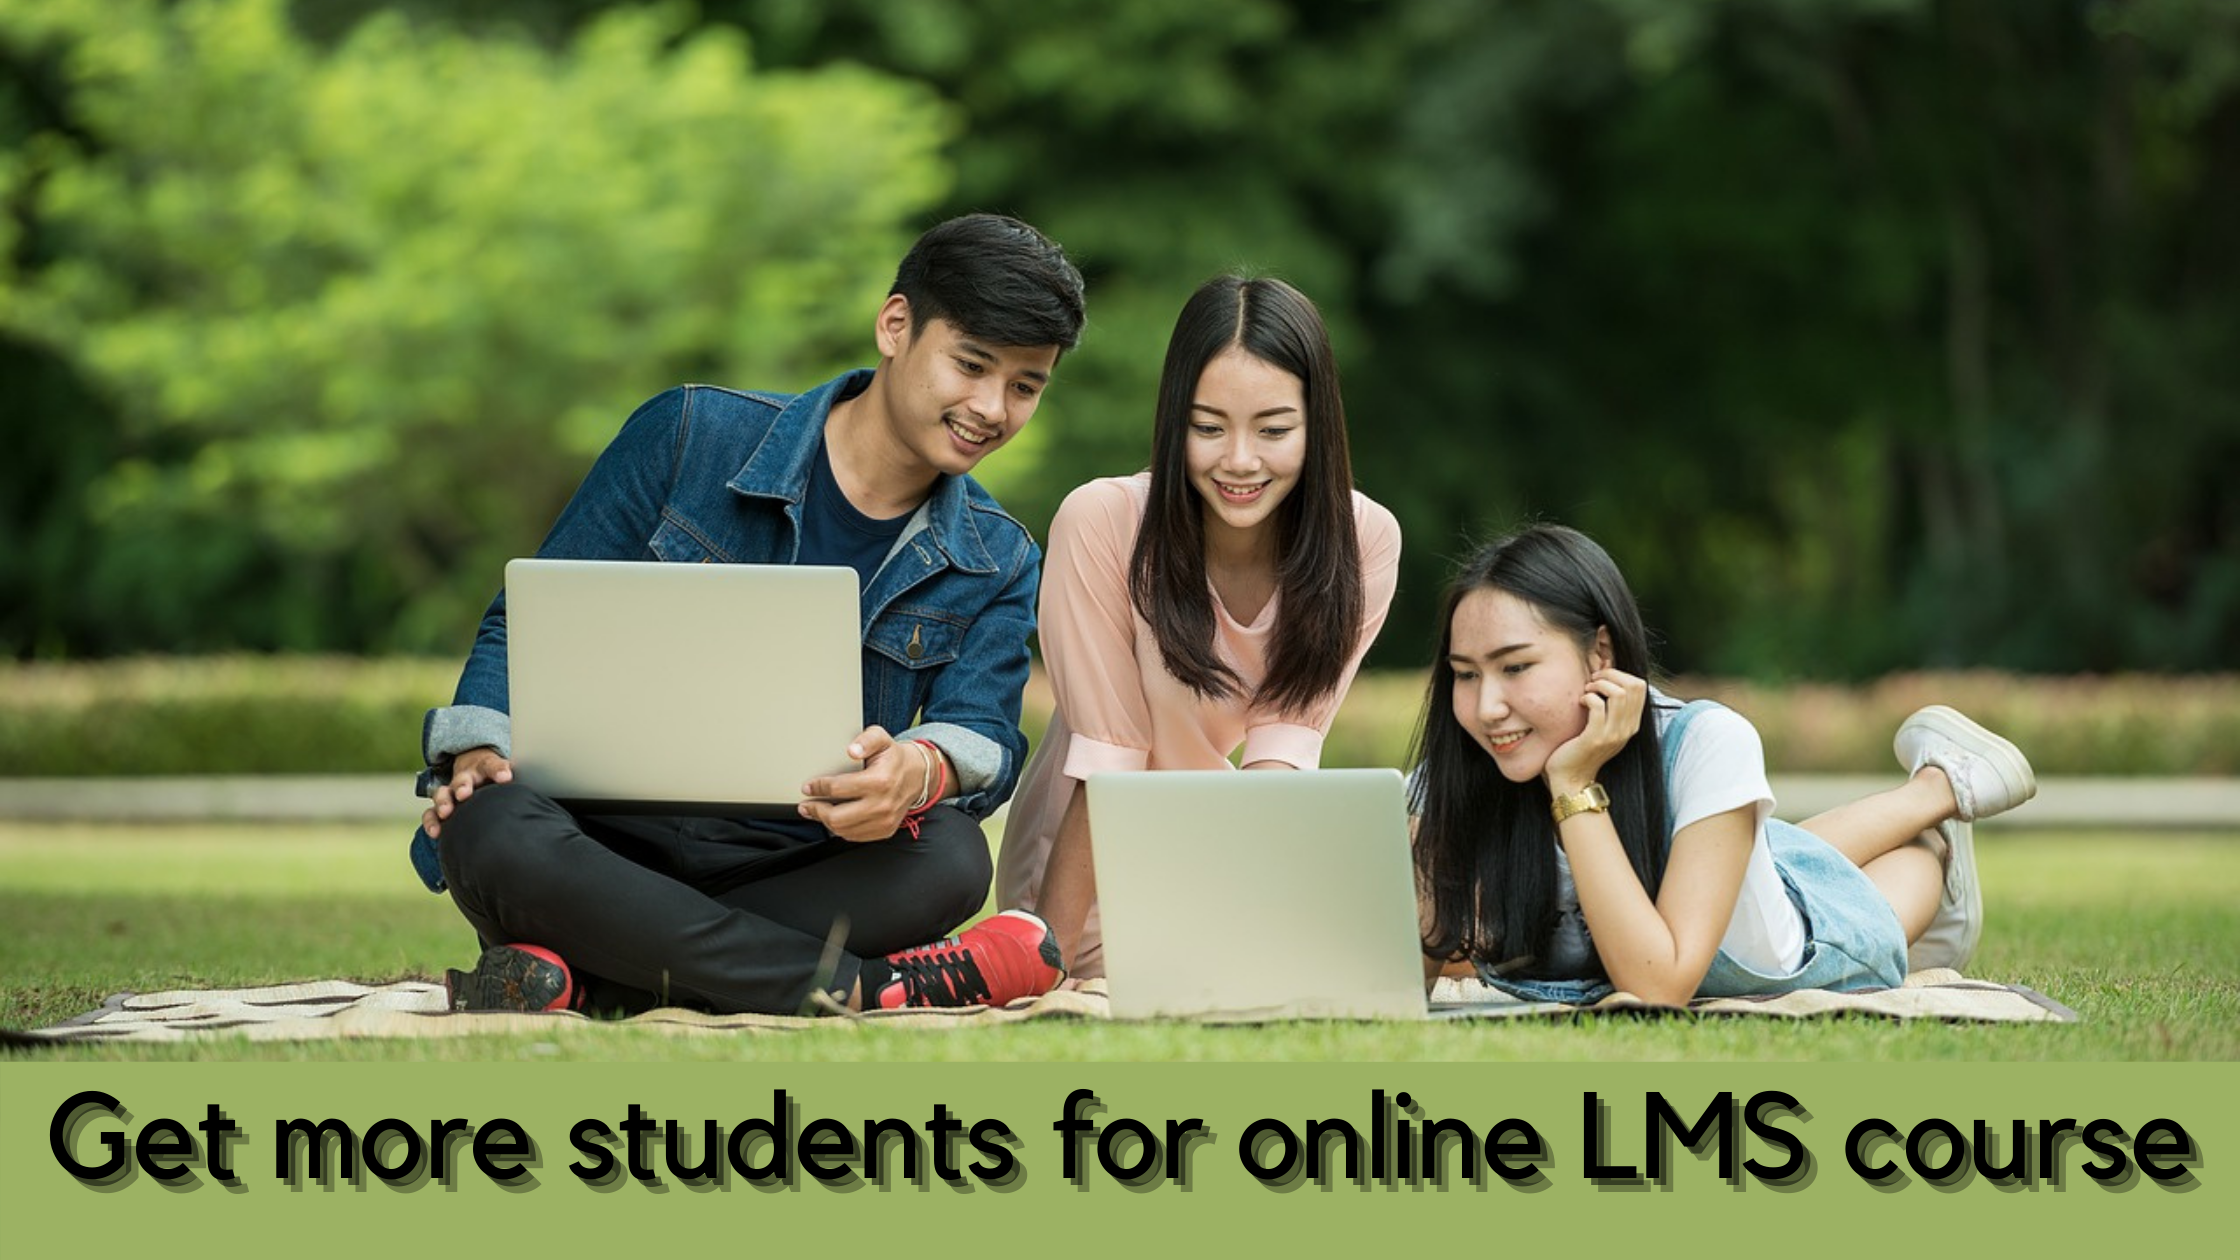 How to get more students for your online LMS course